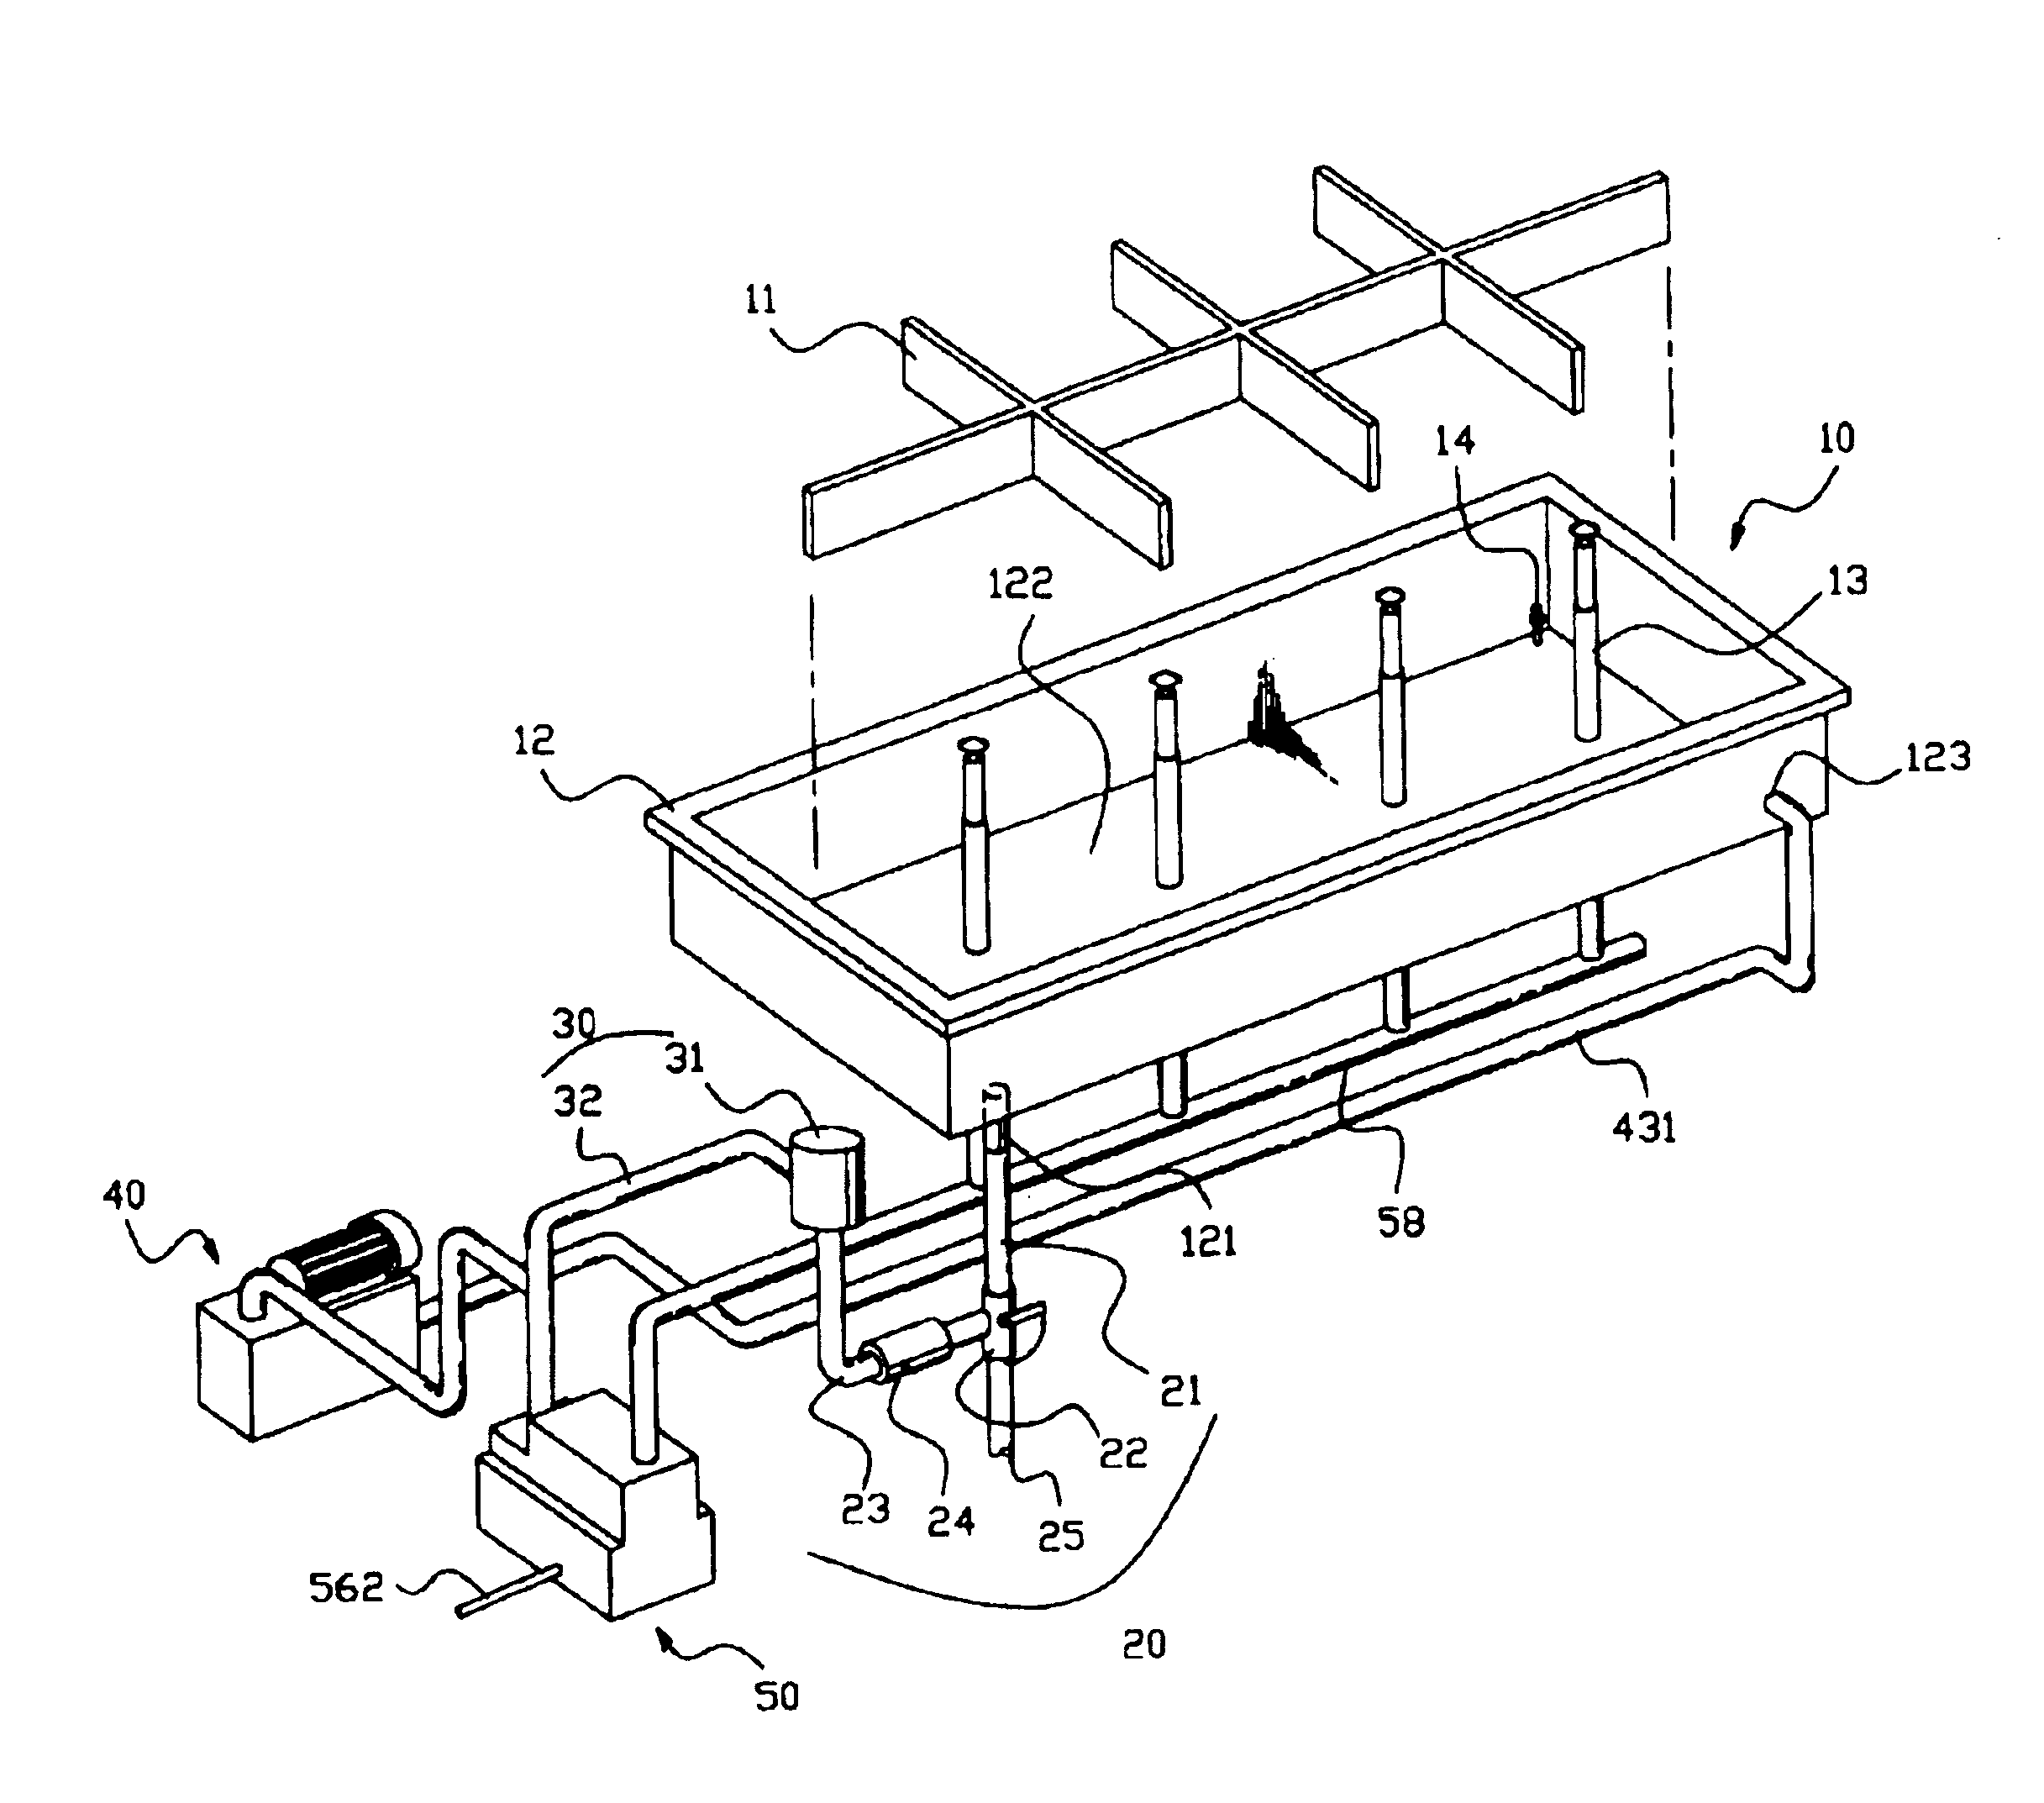 Apparatus for maintaining freshness